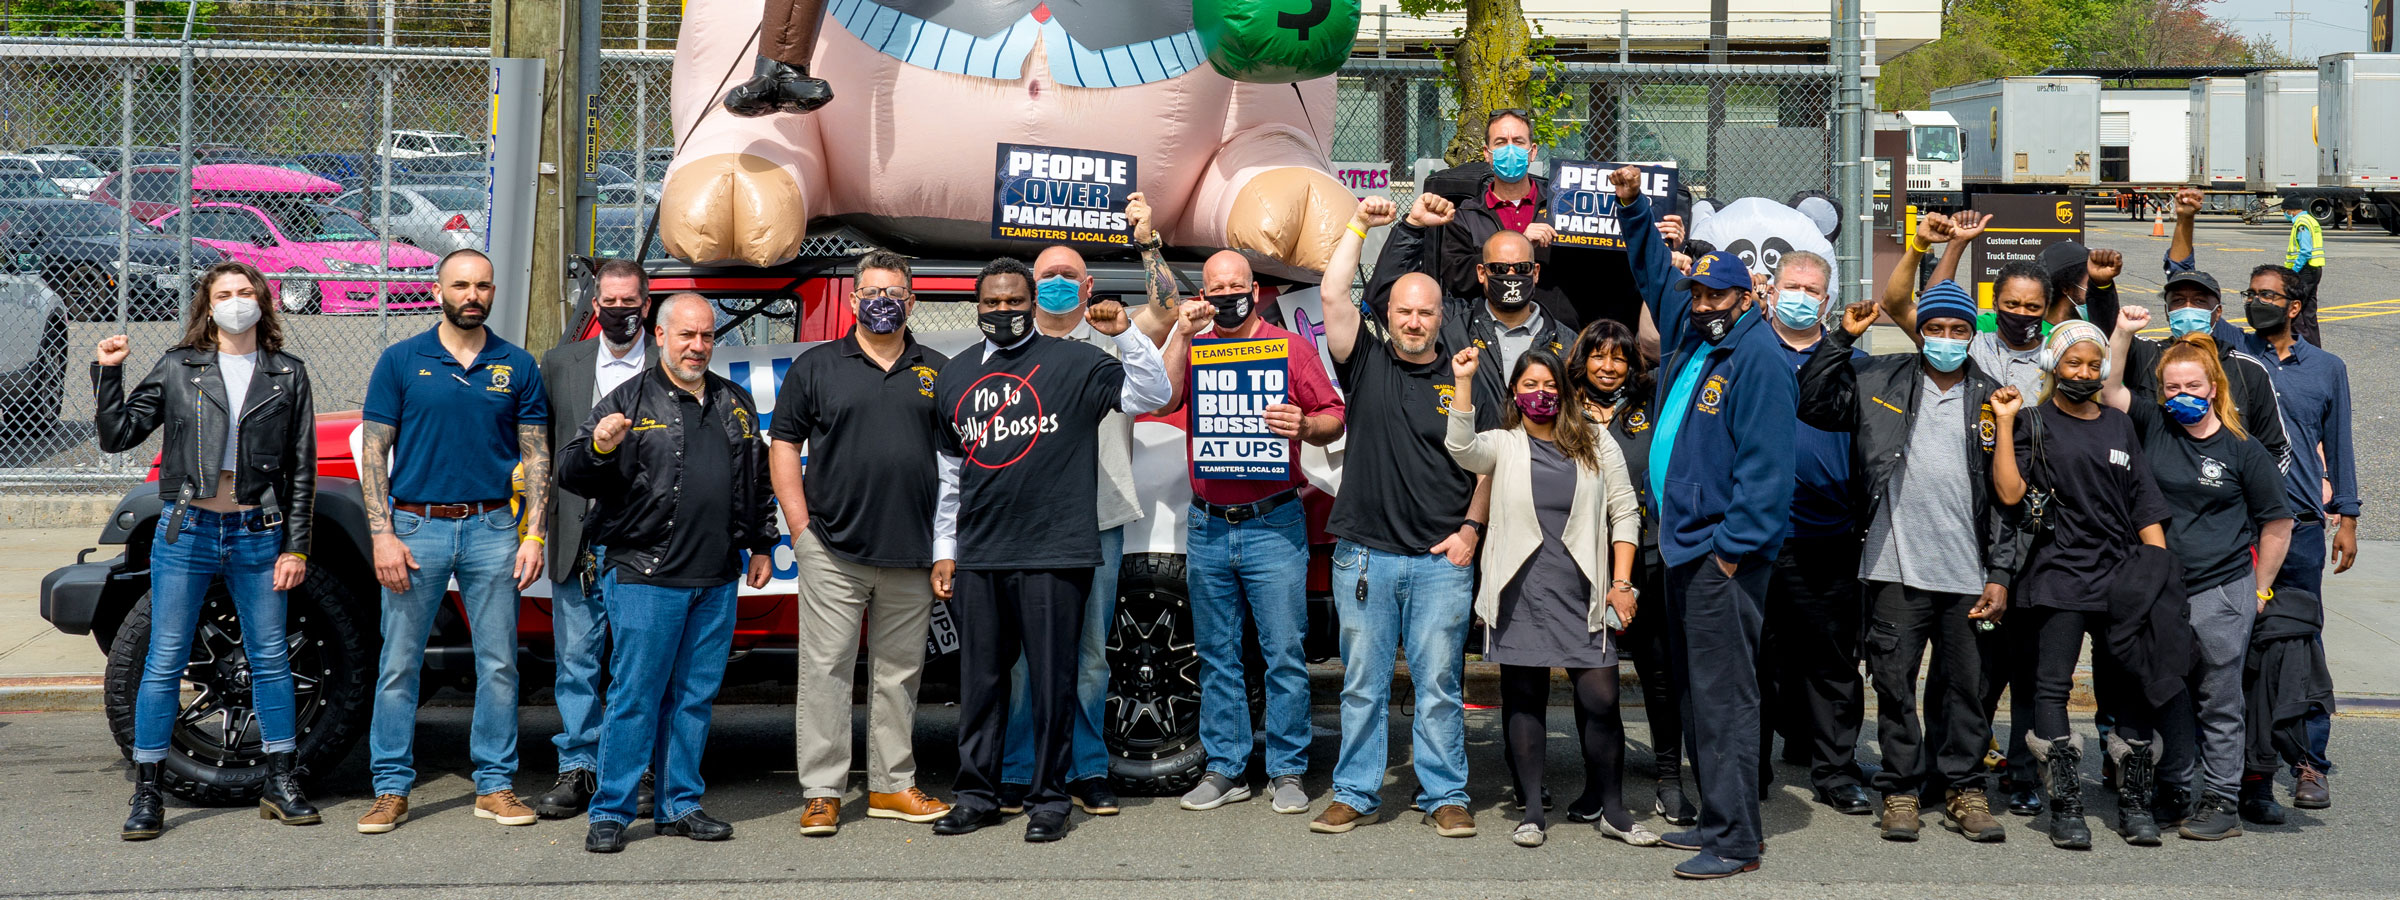 Fired Workers to UPS: “Put People Over Profit”